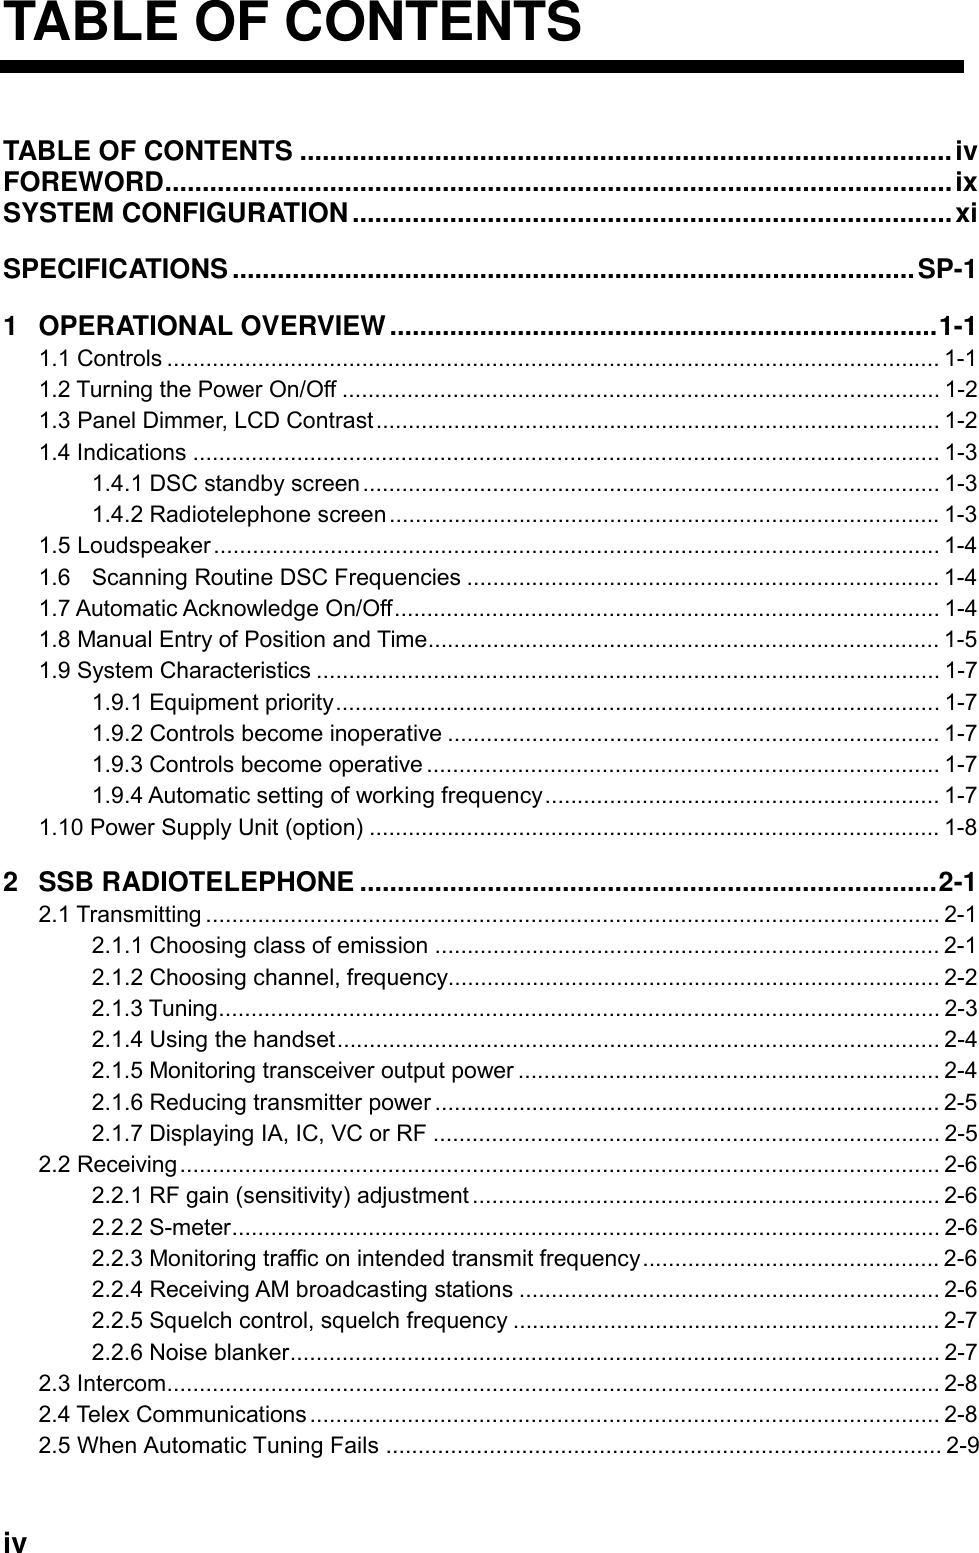   iv TABLE OF CONTENTS TABLE OF CONTENTS .......................................................................................iv    FOREWORD.........................................................................................................ix    SYSTEM CONFIGURATION................................................................................xi SPECIFICATIONS...........................................................................................SP-1 1 OPERATIONAL OVERVIEW.........................................................................1-1 1.1 Controls ....................................................................................................................... 1-1 1.2 Turning the Power On/Off ............................................................................................ 1-2 1.3 Panel Dimmer, LCD Contrast....................................................................................... 1-2 1.4 Indications ................................................................................................................... 1-3 1.4.1 DSC standby screen......................................................................................... 1-3 1.4.2 Radiotelephone screen..................................................................................... 1-3 1.5 Loudspeaker................................................................................................................ 1-4 1.6 Scanning Routine DSC Frequencies ......................................................................... 1-4 1.7 Automatic Acknowledge On/Off.................................................................................... 1-4 1.8 Manual Entry of Position and Time............................................................................... 1-5 1.9 System Characteristics ................................................................................................ 1-7 1.9.1 Equipment priority............................................................................................. 1-7 1.9.2 Controls become inoperative ............................................................................ 1-7 1.9.3 Controls become operative ............................................................................... 1-7 1.9.4 Automatic setting of working frequency............................................................. 1-7 1.10 Power Supply Unit (option) ........................................................................................ 1-8 2 SSB RADIOTELEPHONE .............................................................................2-1 2.1 Transmitting ................................................................................................................. 2-1 2.1.1 Choosing class of emission .............................................................................. 2-1 2.1.2 Choosing channel, frequency............................................................................ 2-2 2.1.3 Tuning............................................................................................................... 2-3 2.1.4 Using the handset............................................................................................. 2-4 2.1.5 Monitoring transceiver output power ................................................................. 2-4 2.1.6 Reducing transmitter power .............................................................................. 2-5 2.1.7 Displaying IA, IC, VC or RF .............................................................................. 2-5 2.2 Receiving..................................................................................................................... 2-6 2.2.1 RF gain (sensitivity) adjustment........................................................................ 2-6 2.2.2 S-meter............................................................................................................. 2-6 2.2.3 Monitoring traffic on intended transmit frequency.............................................. 2-6 2.2.4 Receiving AM broadcasting stations ................................................................. 2-6 2.2.5 Squelch control, squelch frequency .................................................................. 2-7 2.2.6 Noise blanker.................................................................................................... 2-7 2.3 Intercom....................................................................................................................... 2-8 2.4 Telex Communications................................................................................................. 2-8 2.5 When Automatic Tuning Fails ...................................................................................... 2-9 